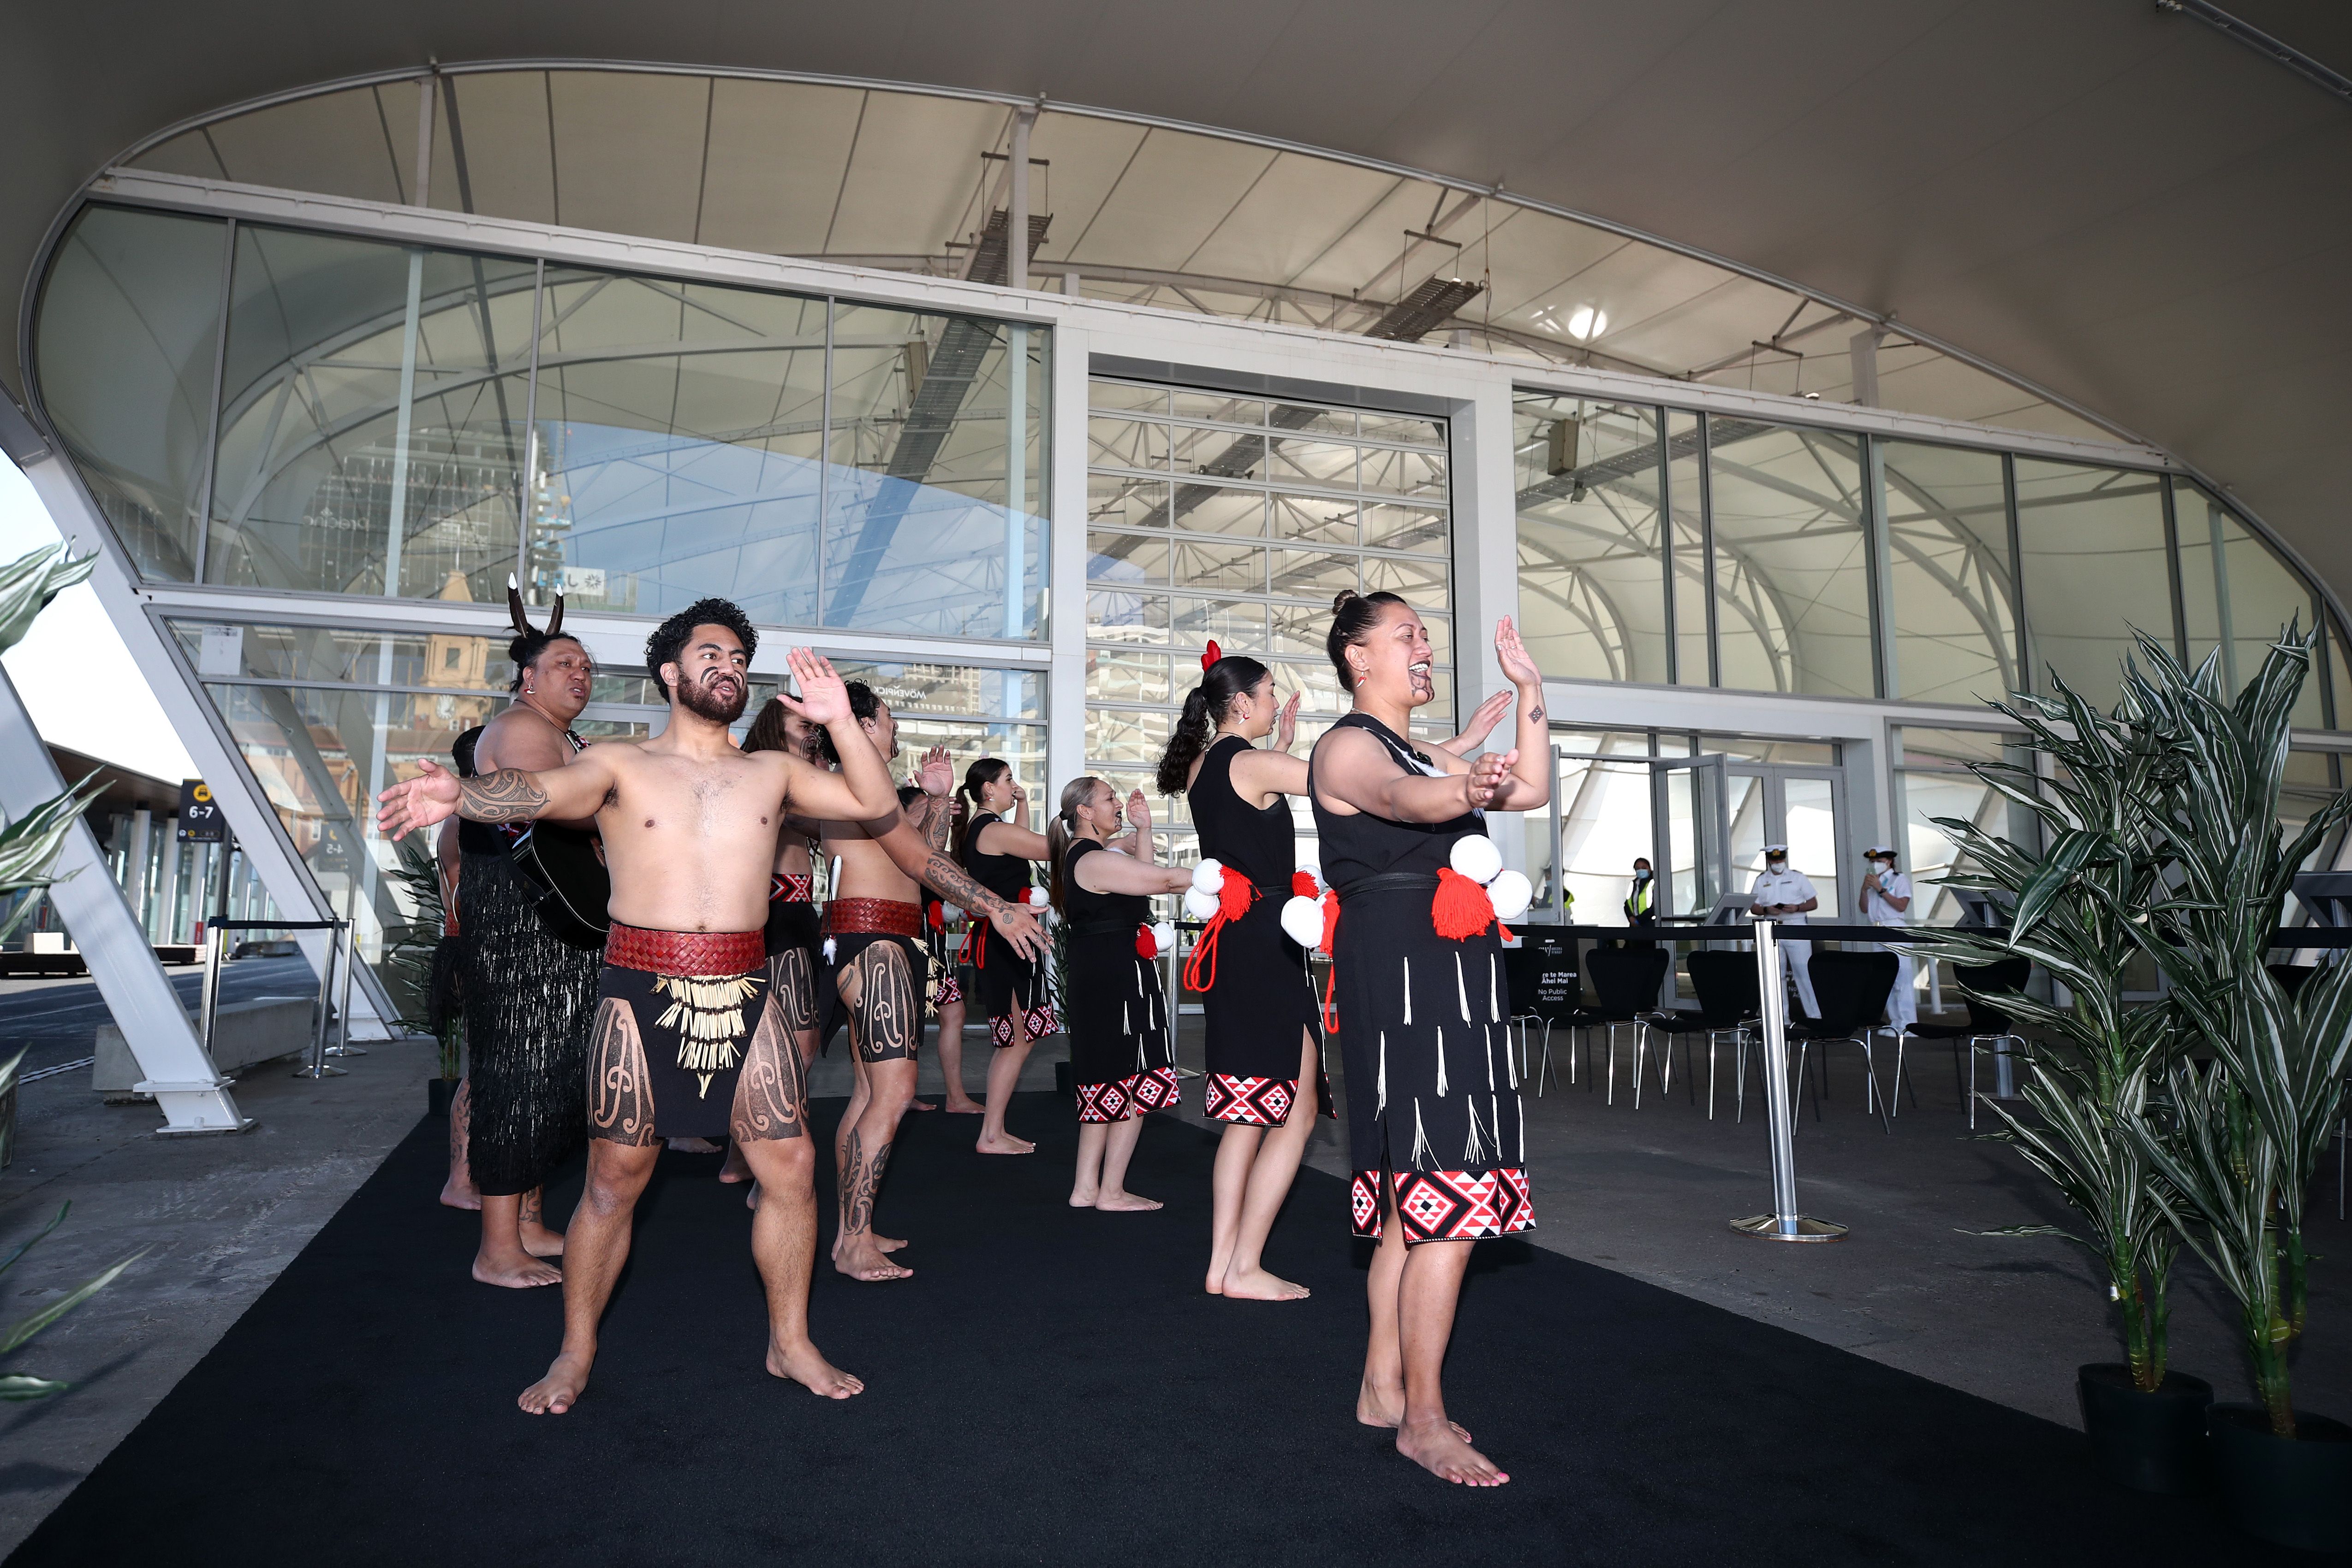 A Ngati Whatua group welcomes passengers as the Pacific Explorer arrives in Auckland Harbour on August 12, 2022 in Auckland, New Zealand. 